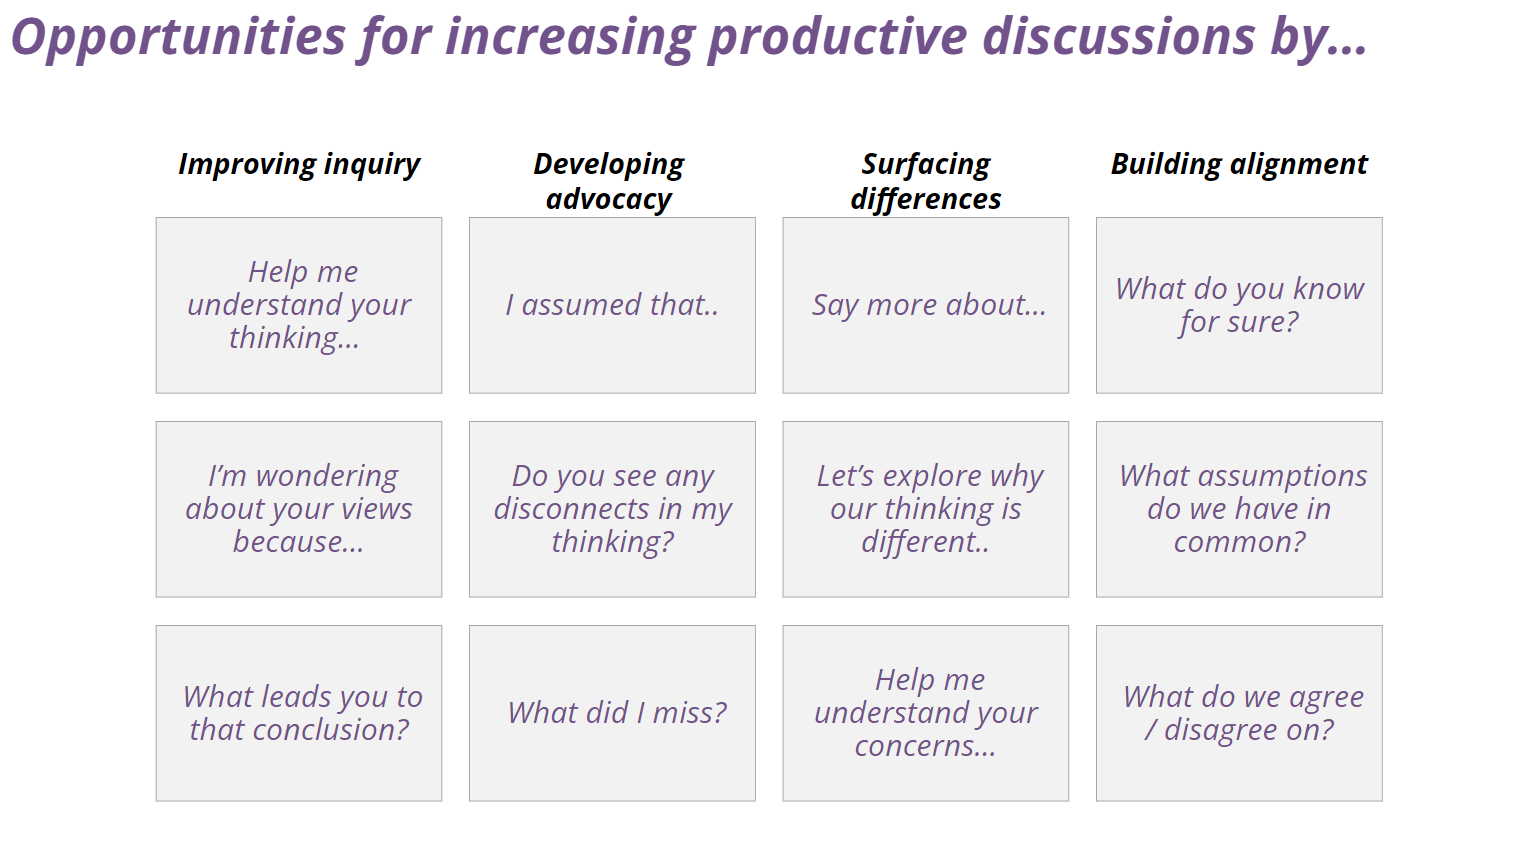 Picture showing helpful prompts for increasing productive discussions.

Text in the picture is as follows:

Opportunities for increasing productive discussions by...
Improving inquiry:  Help me understand your thinking, I'm wondering about your views because, What leads you to that conclusion?
Developing advocacy: I assumed that, Do you see any disconnects in my thinking?, what did I miss?
Surfacing differences: Say more about, Let's explore why our thinking is different, Help me understand your concerns.
Building alignment: What do you know for sure?, What assumptions do we have in common?  What do we agree / disagree on?